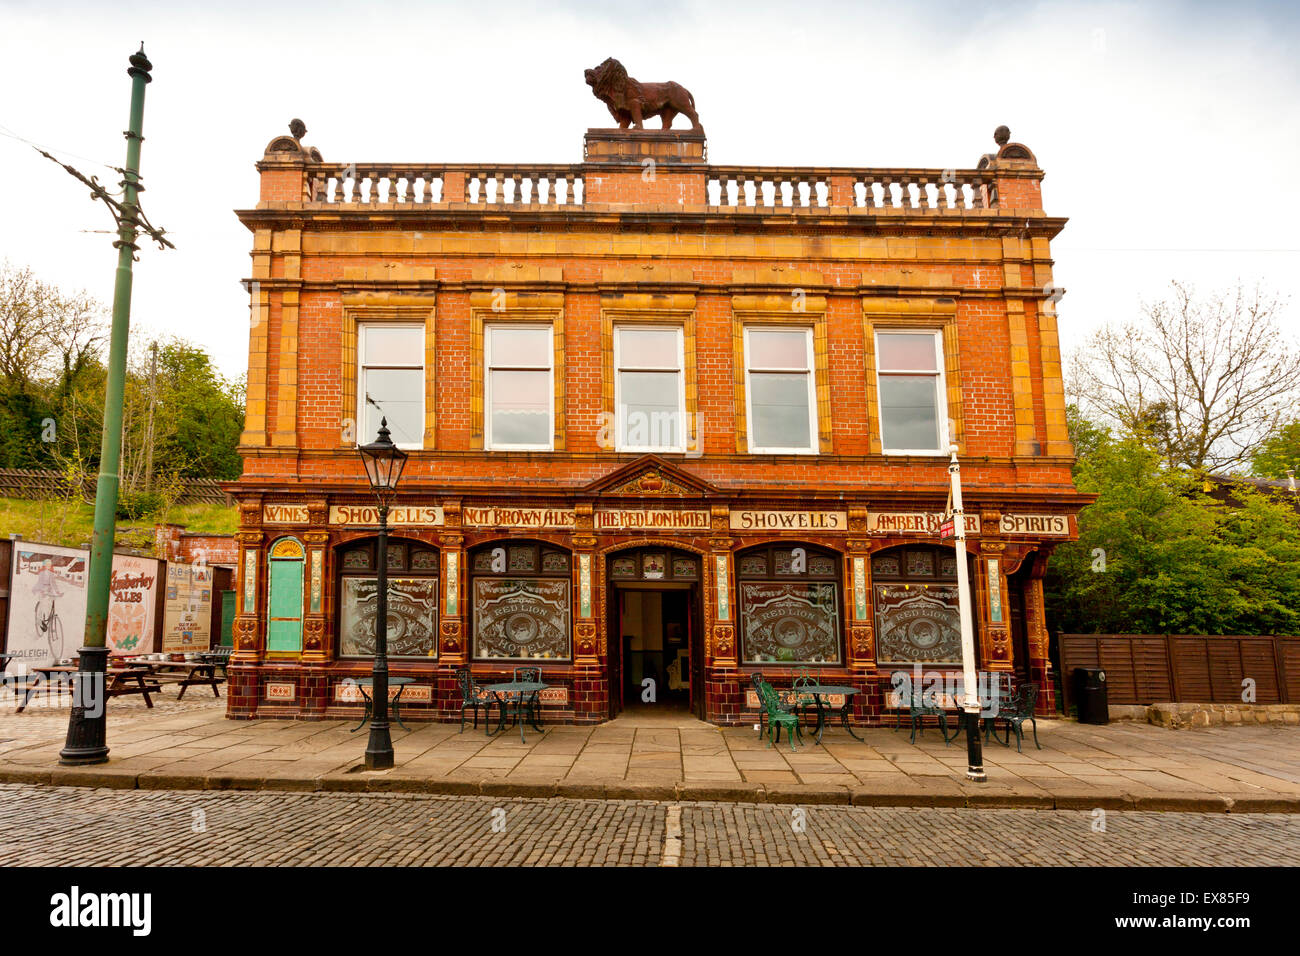 The rebuilt Red Lion Hotel on the cobbled street at the National Tramway Museum, Crich, Derbyshire, UK Stock Photo